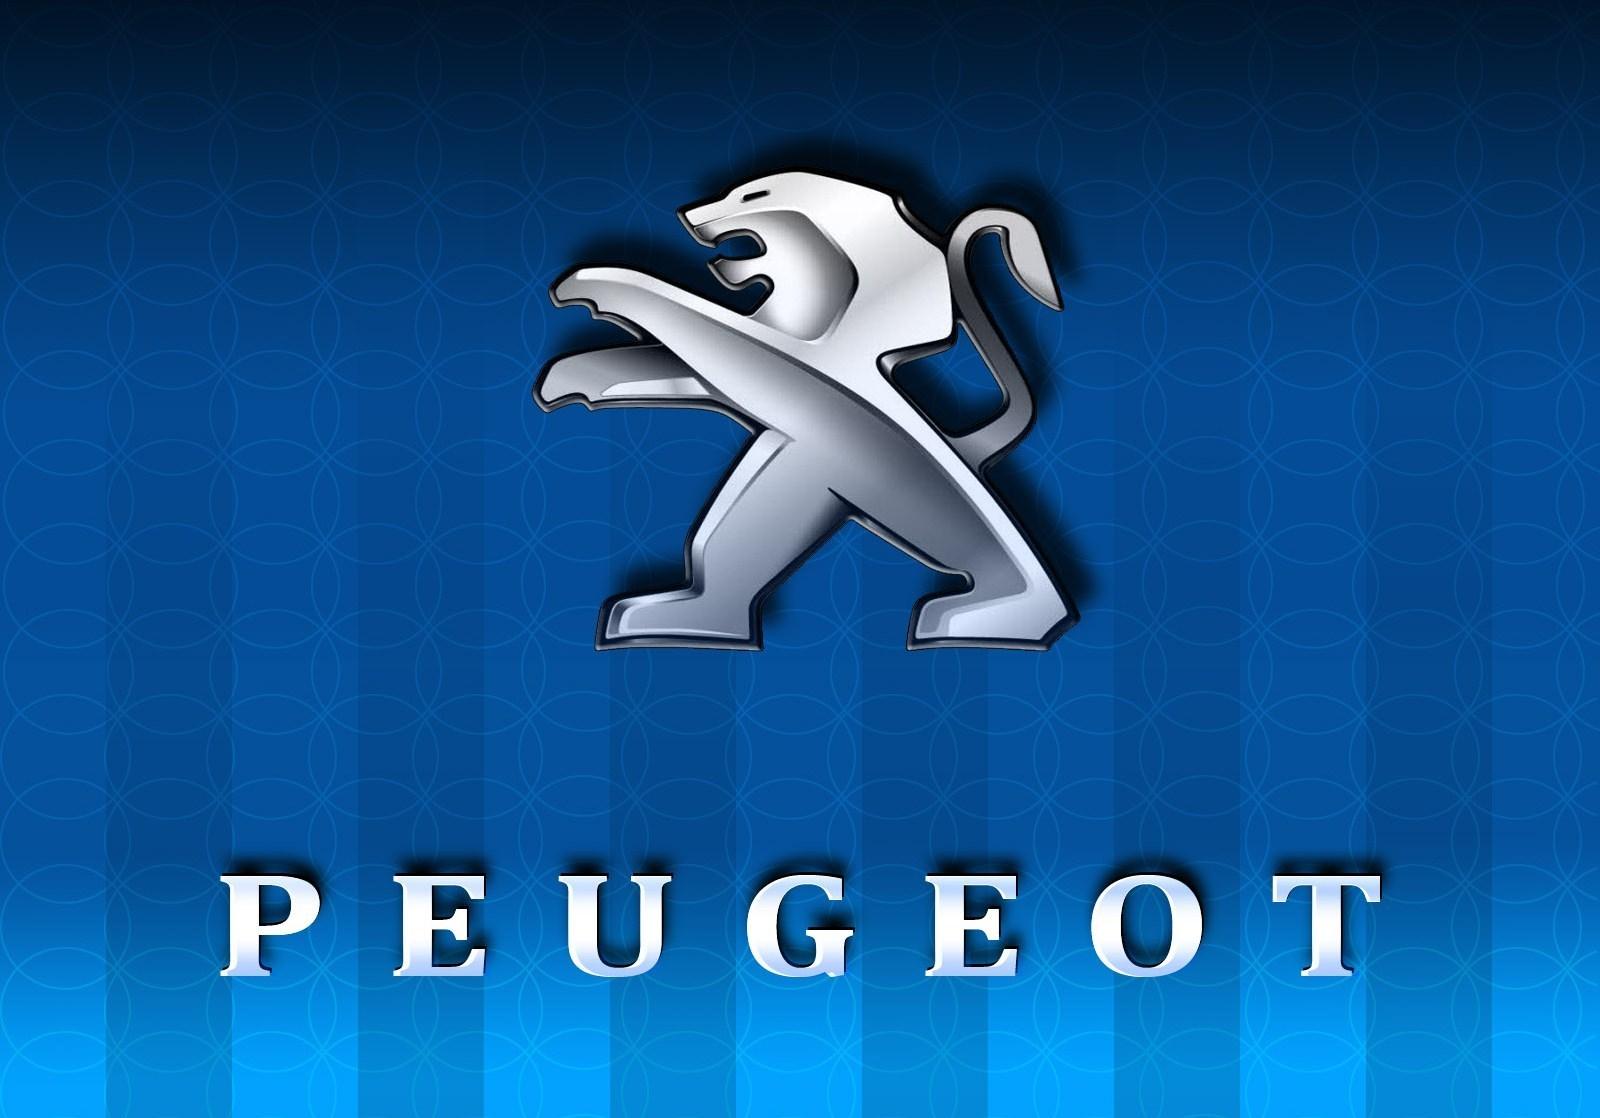 PEUGEOT image PEUGEOT LOGO HD wallpaper and background photo